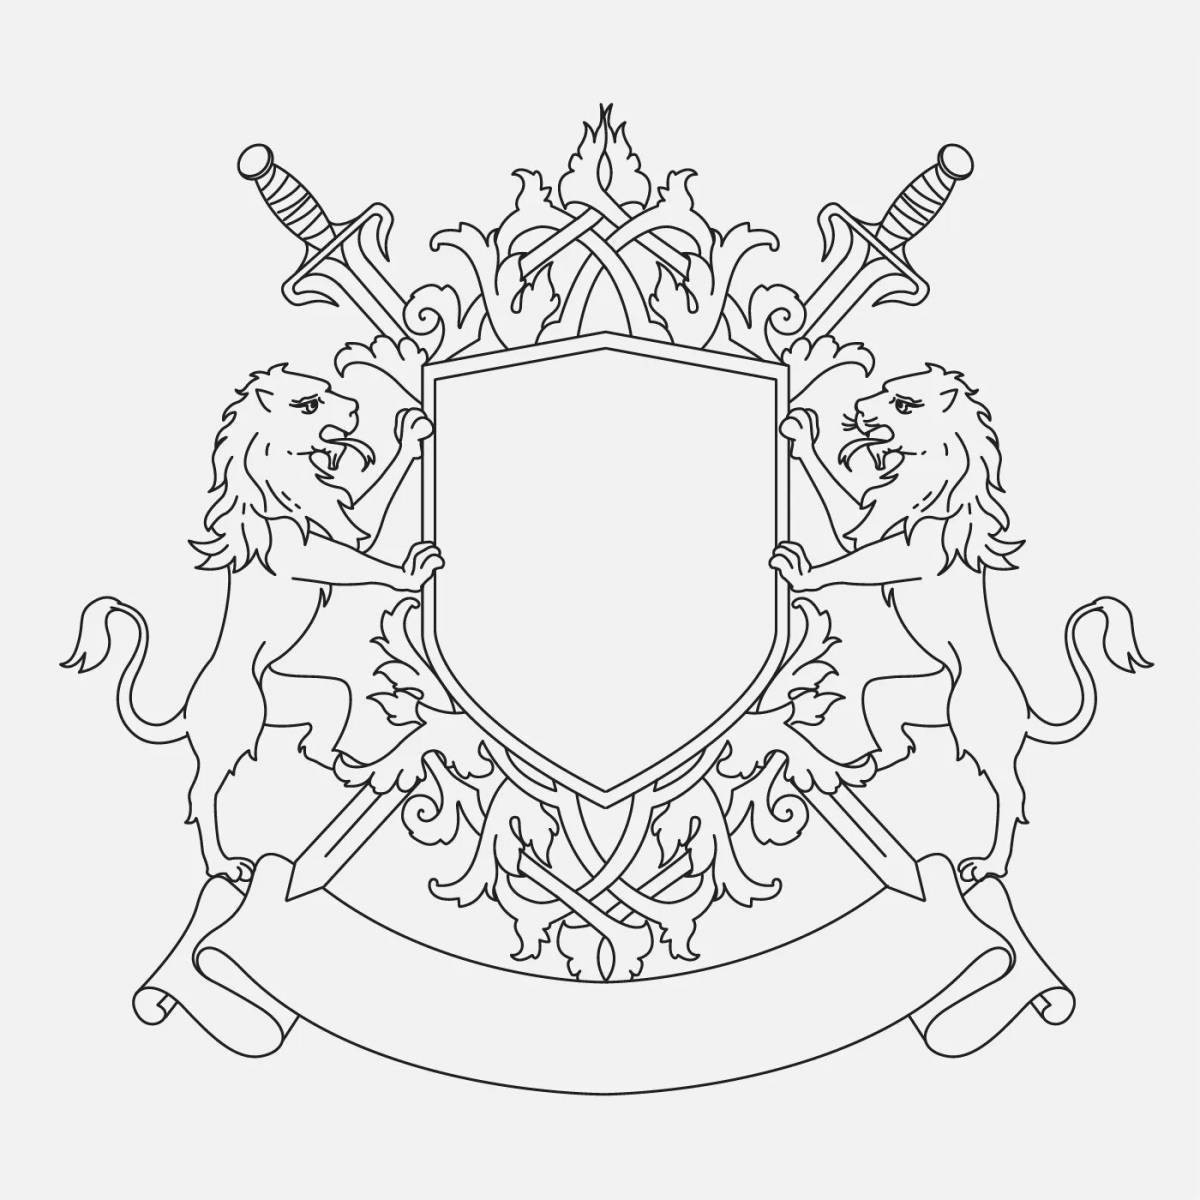 Coloring page majestic coat of arms of karelia